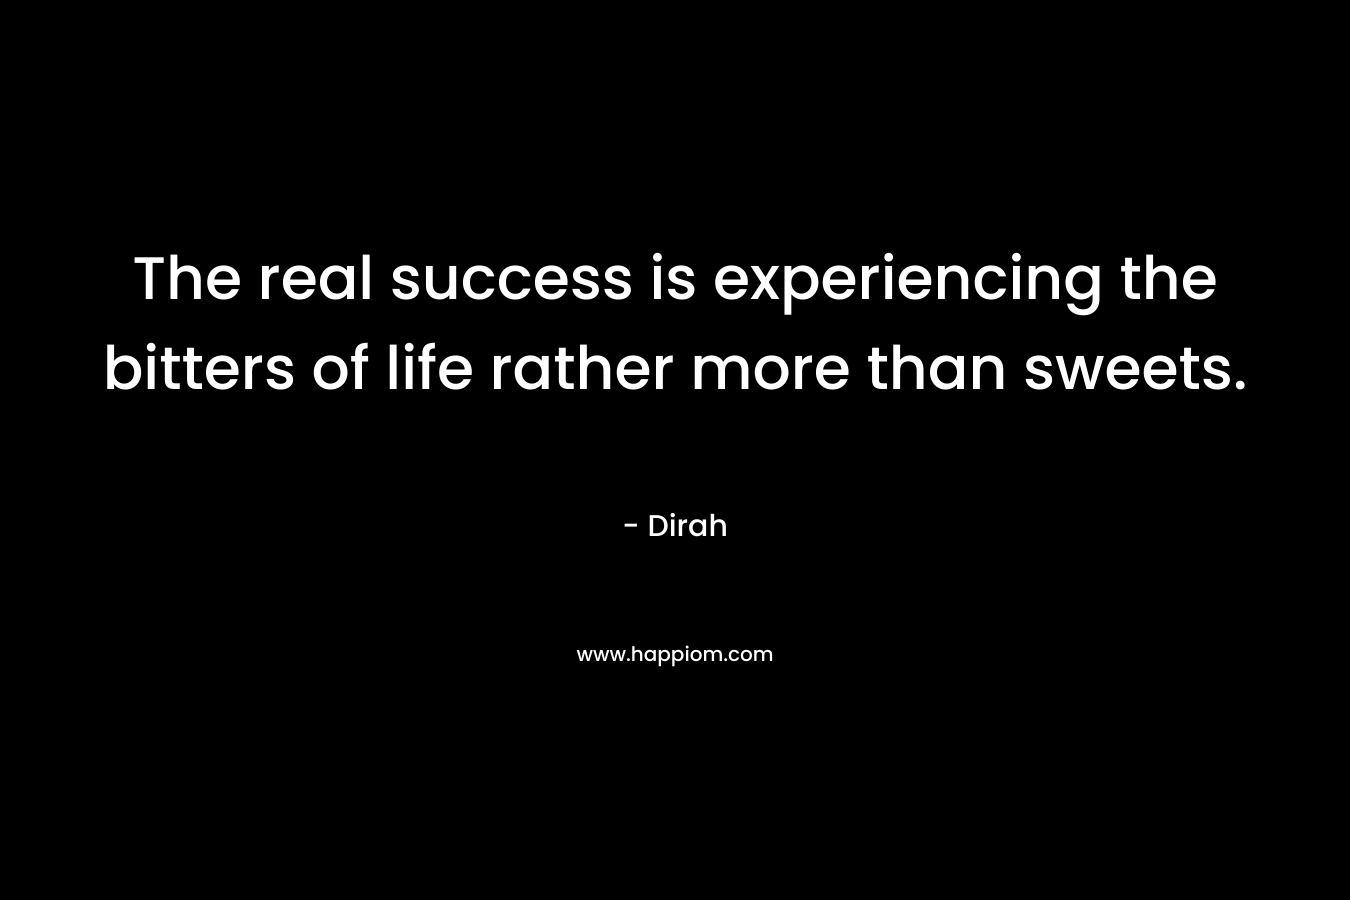 The real success is experiencing the bitters of life rather more than sweets.